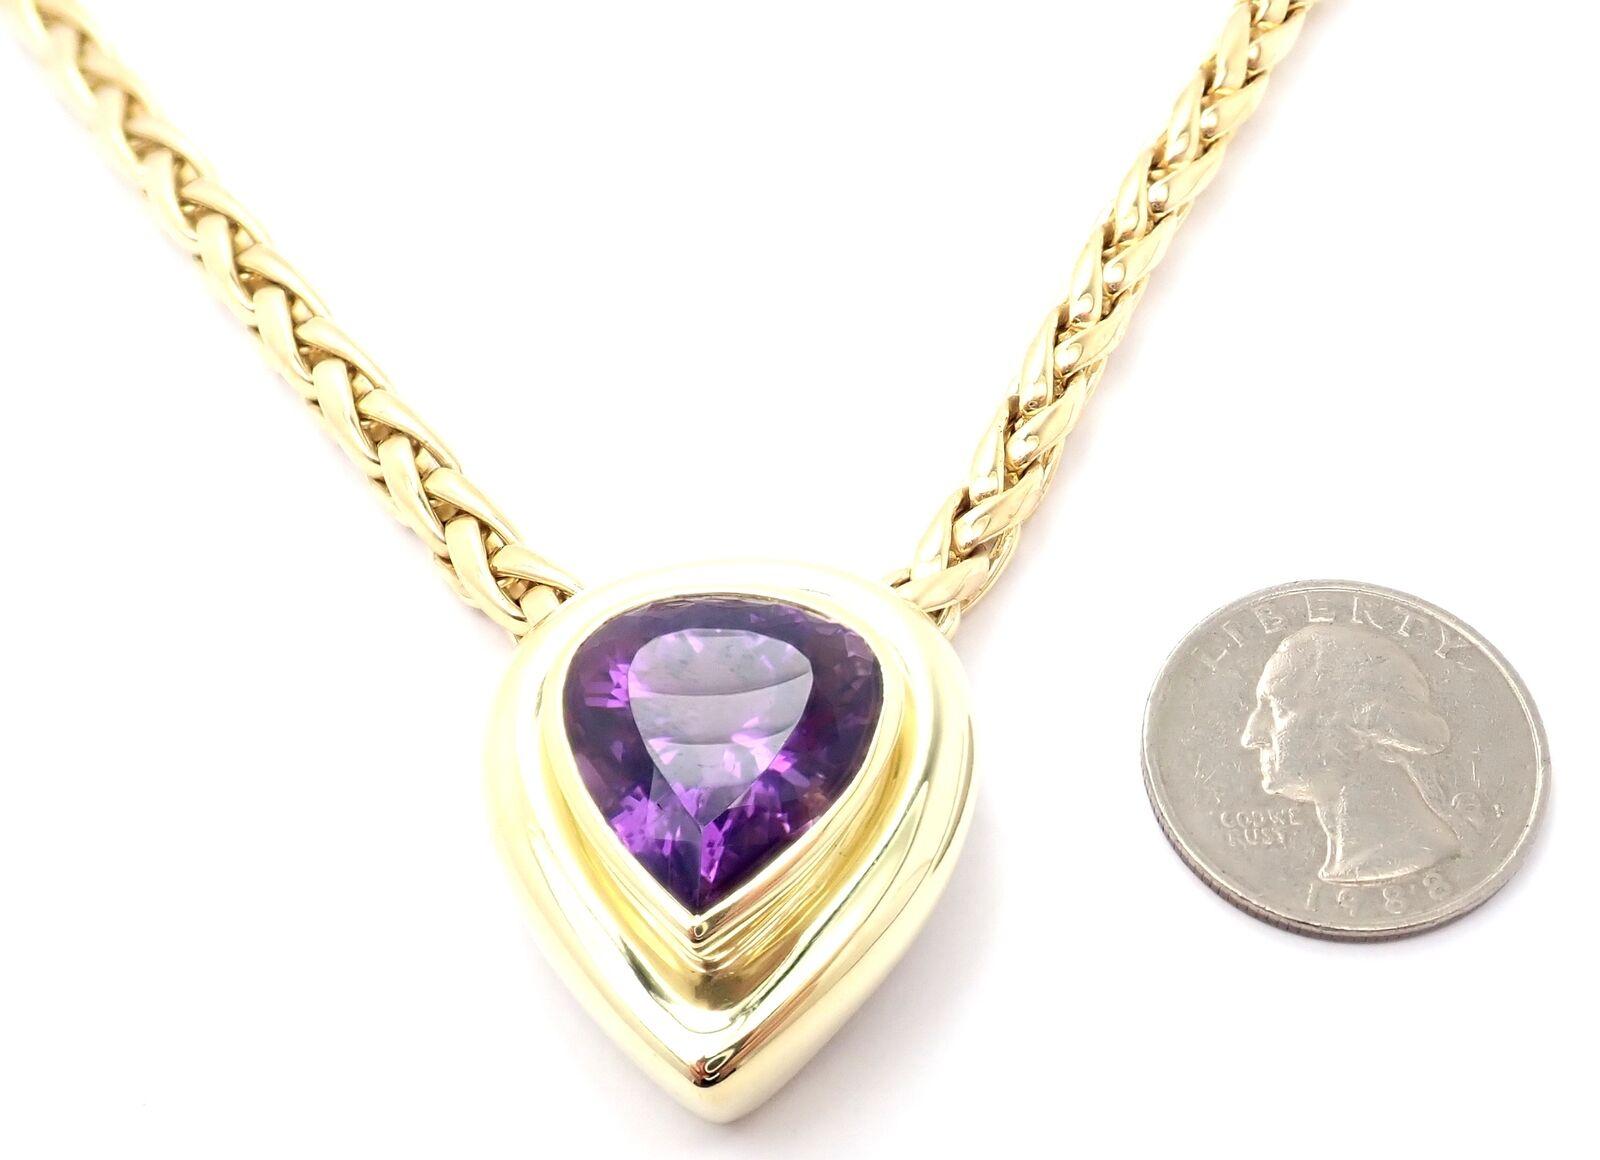 18k Yellow Gold Large Amethyst Pendant Necklace by Paloma Picasso for Tiffany & Co. 
With 1 large amethyst 20mm x 20mm
Details: 
Chain Length: Length: 16